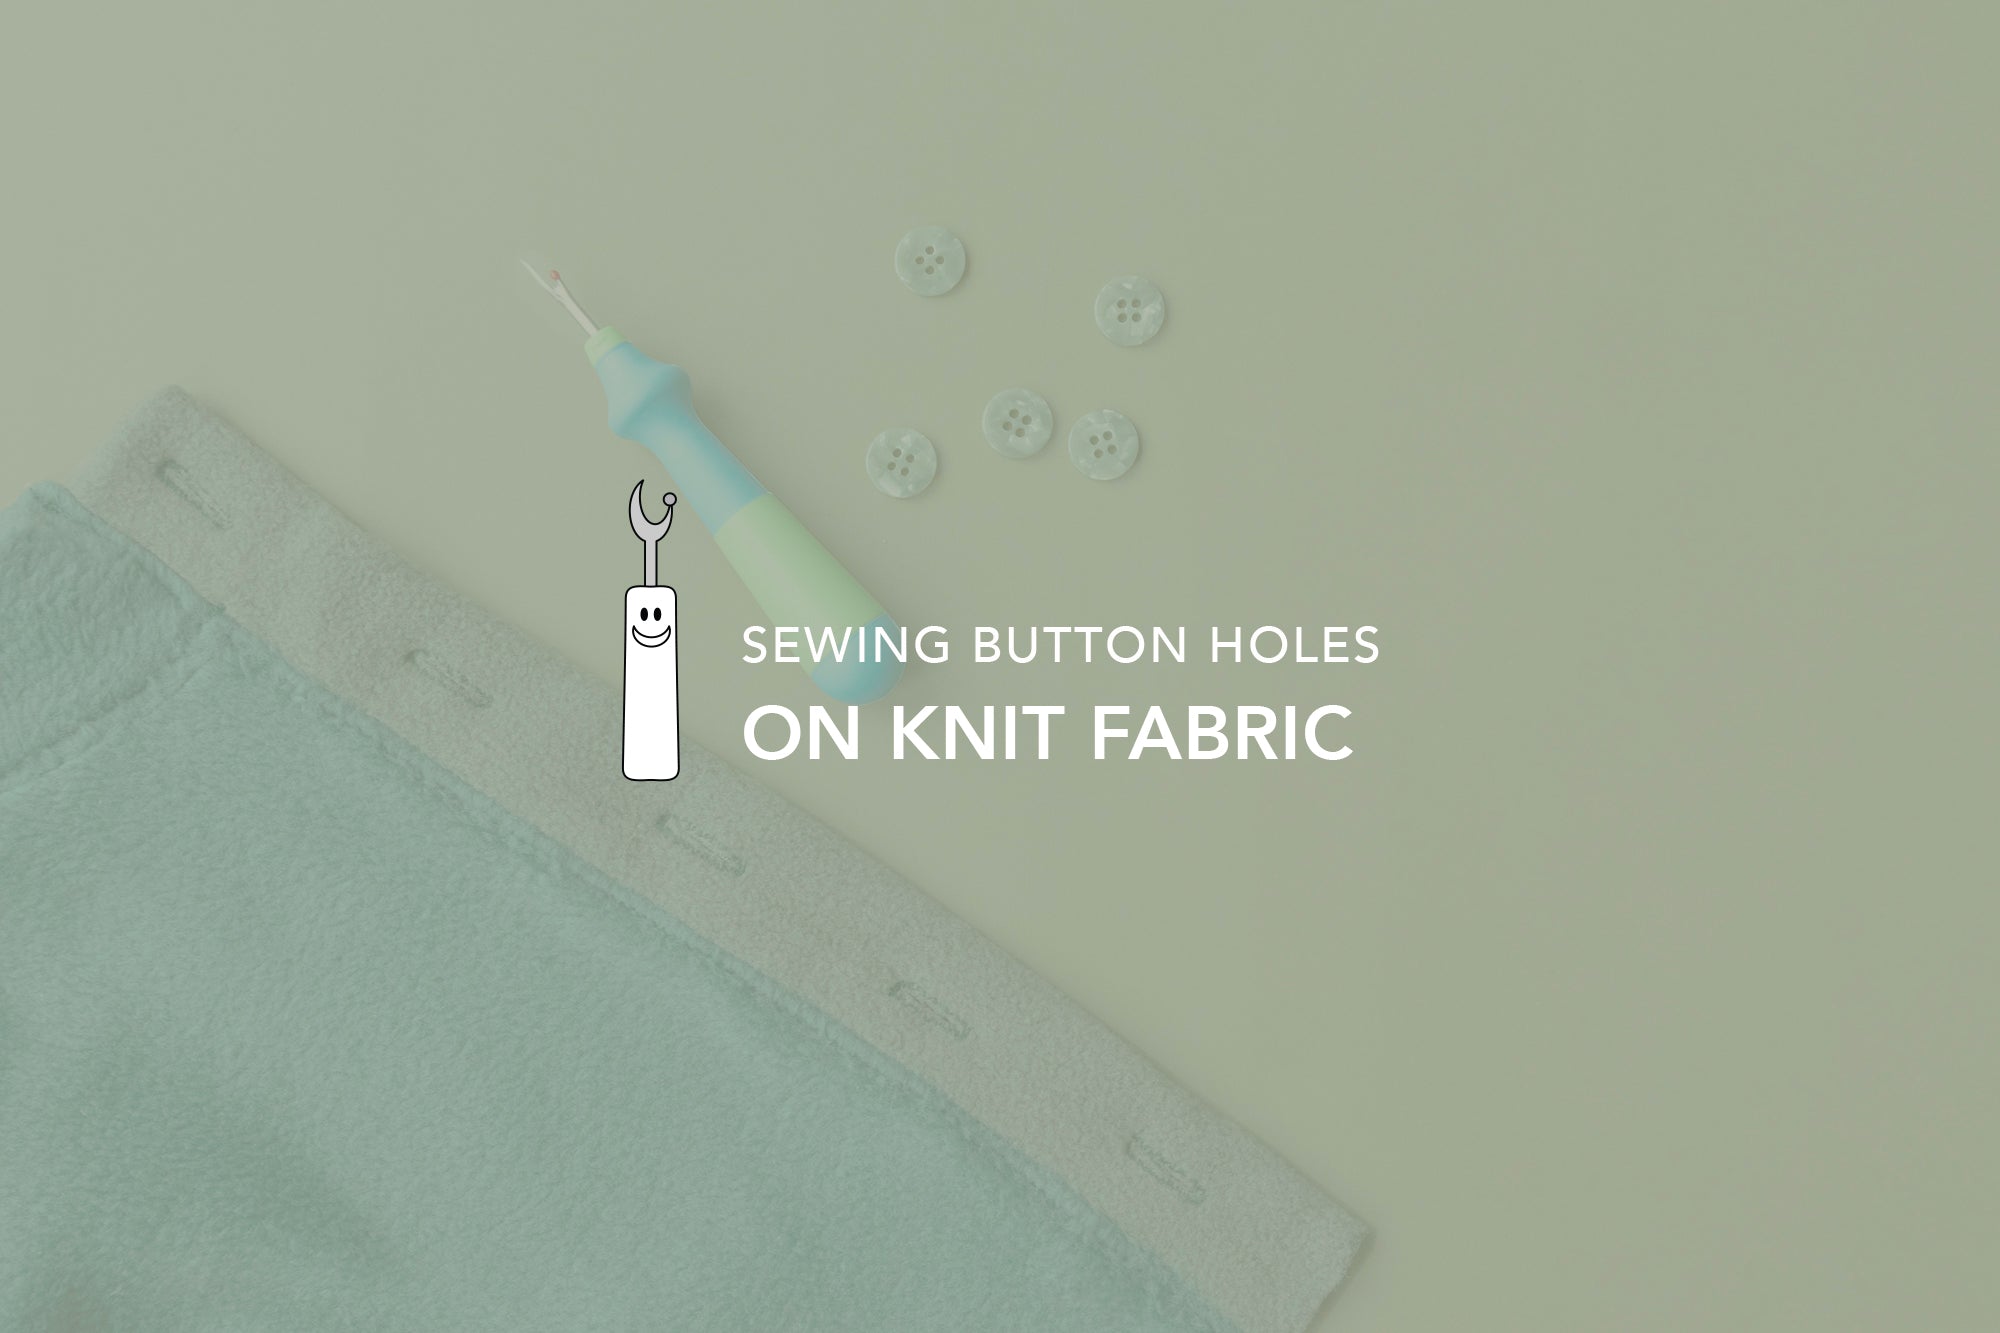 Sewing buttonholes on knit fabrics